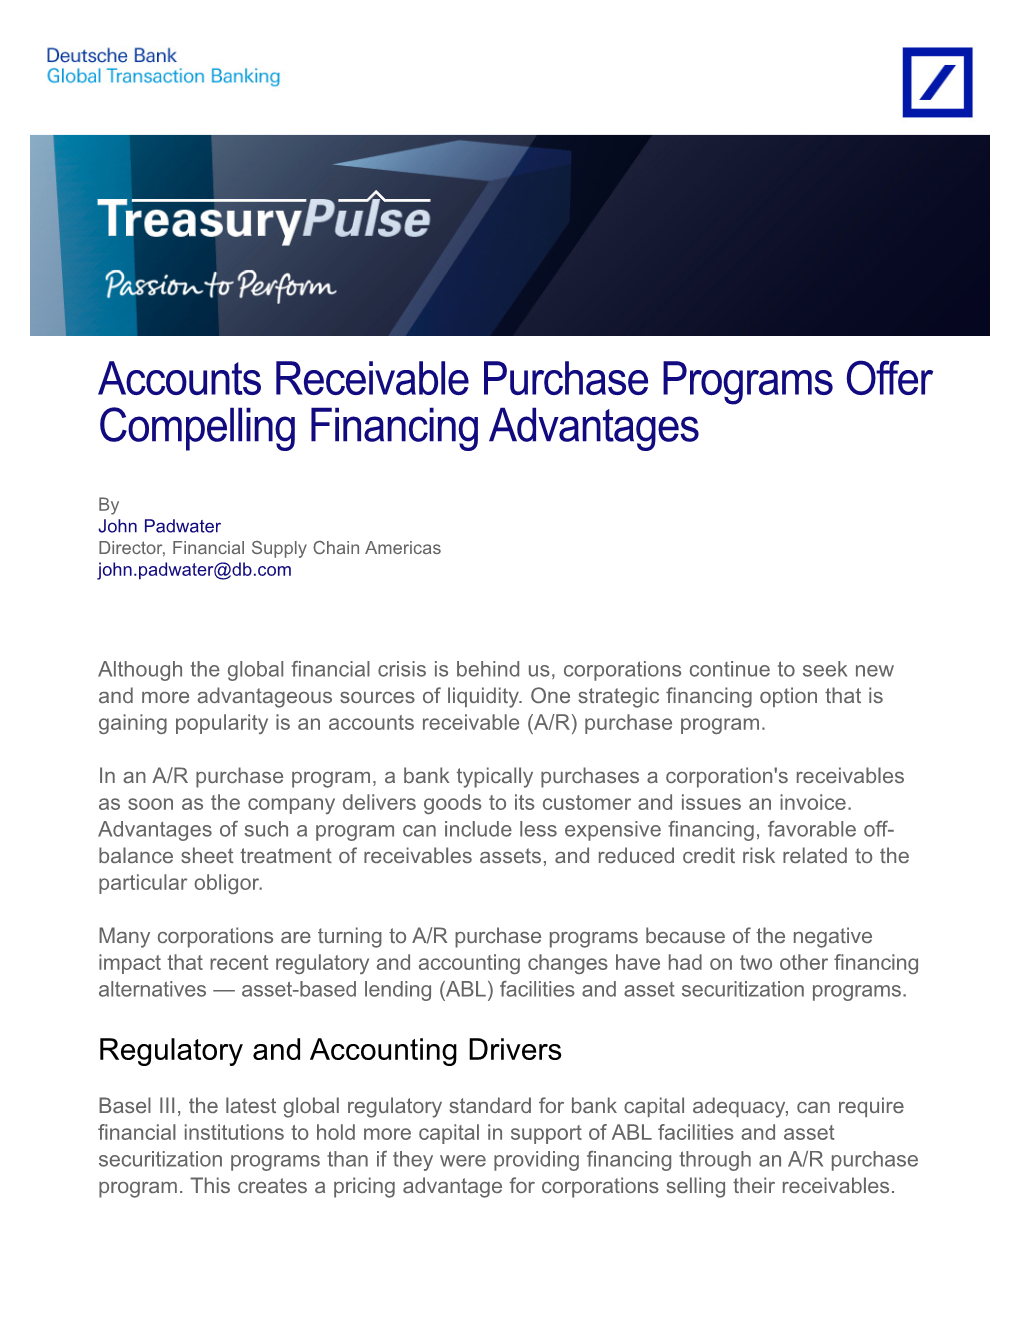 Accounts Receivable Purchase Programs Offer Compelling Financing Advantages